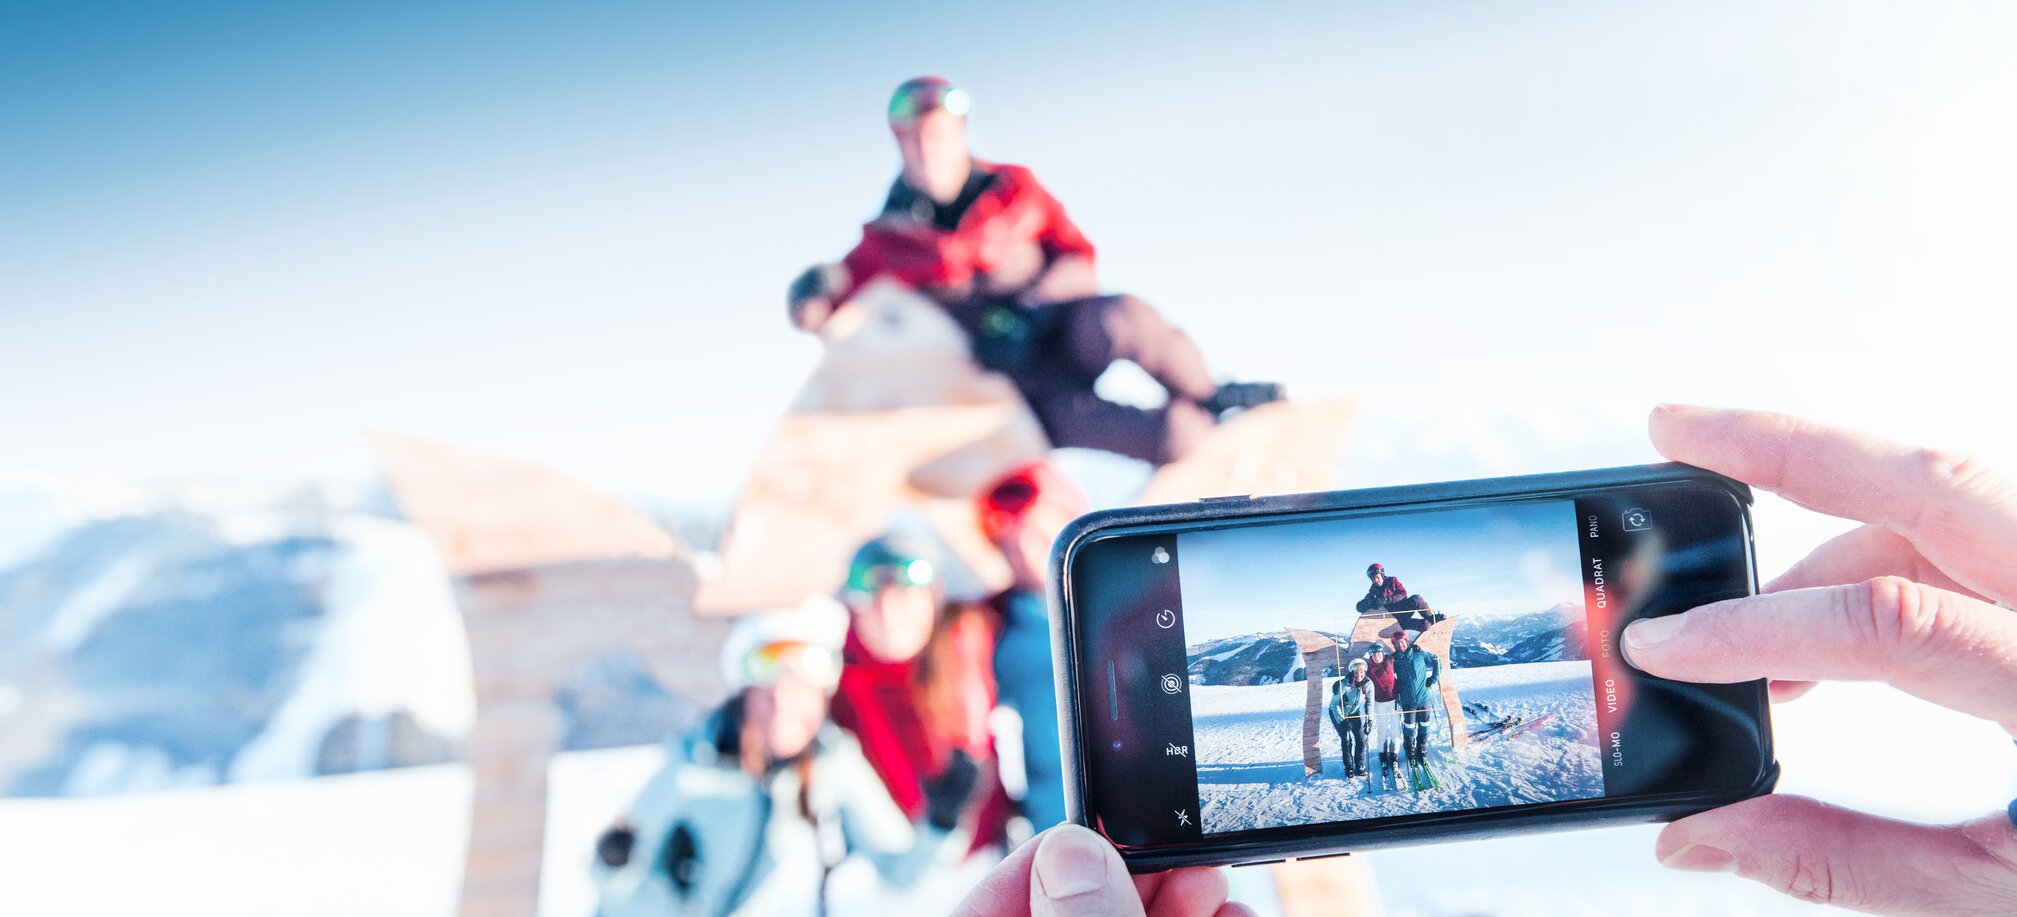 Selfie Time - collect great memories on the slopes of Ski amadé